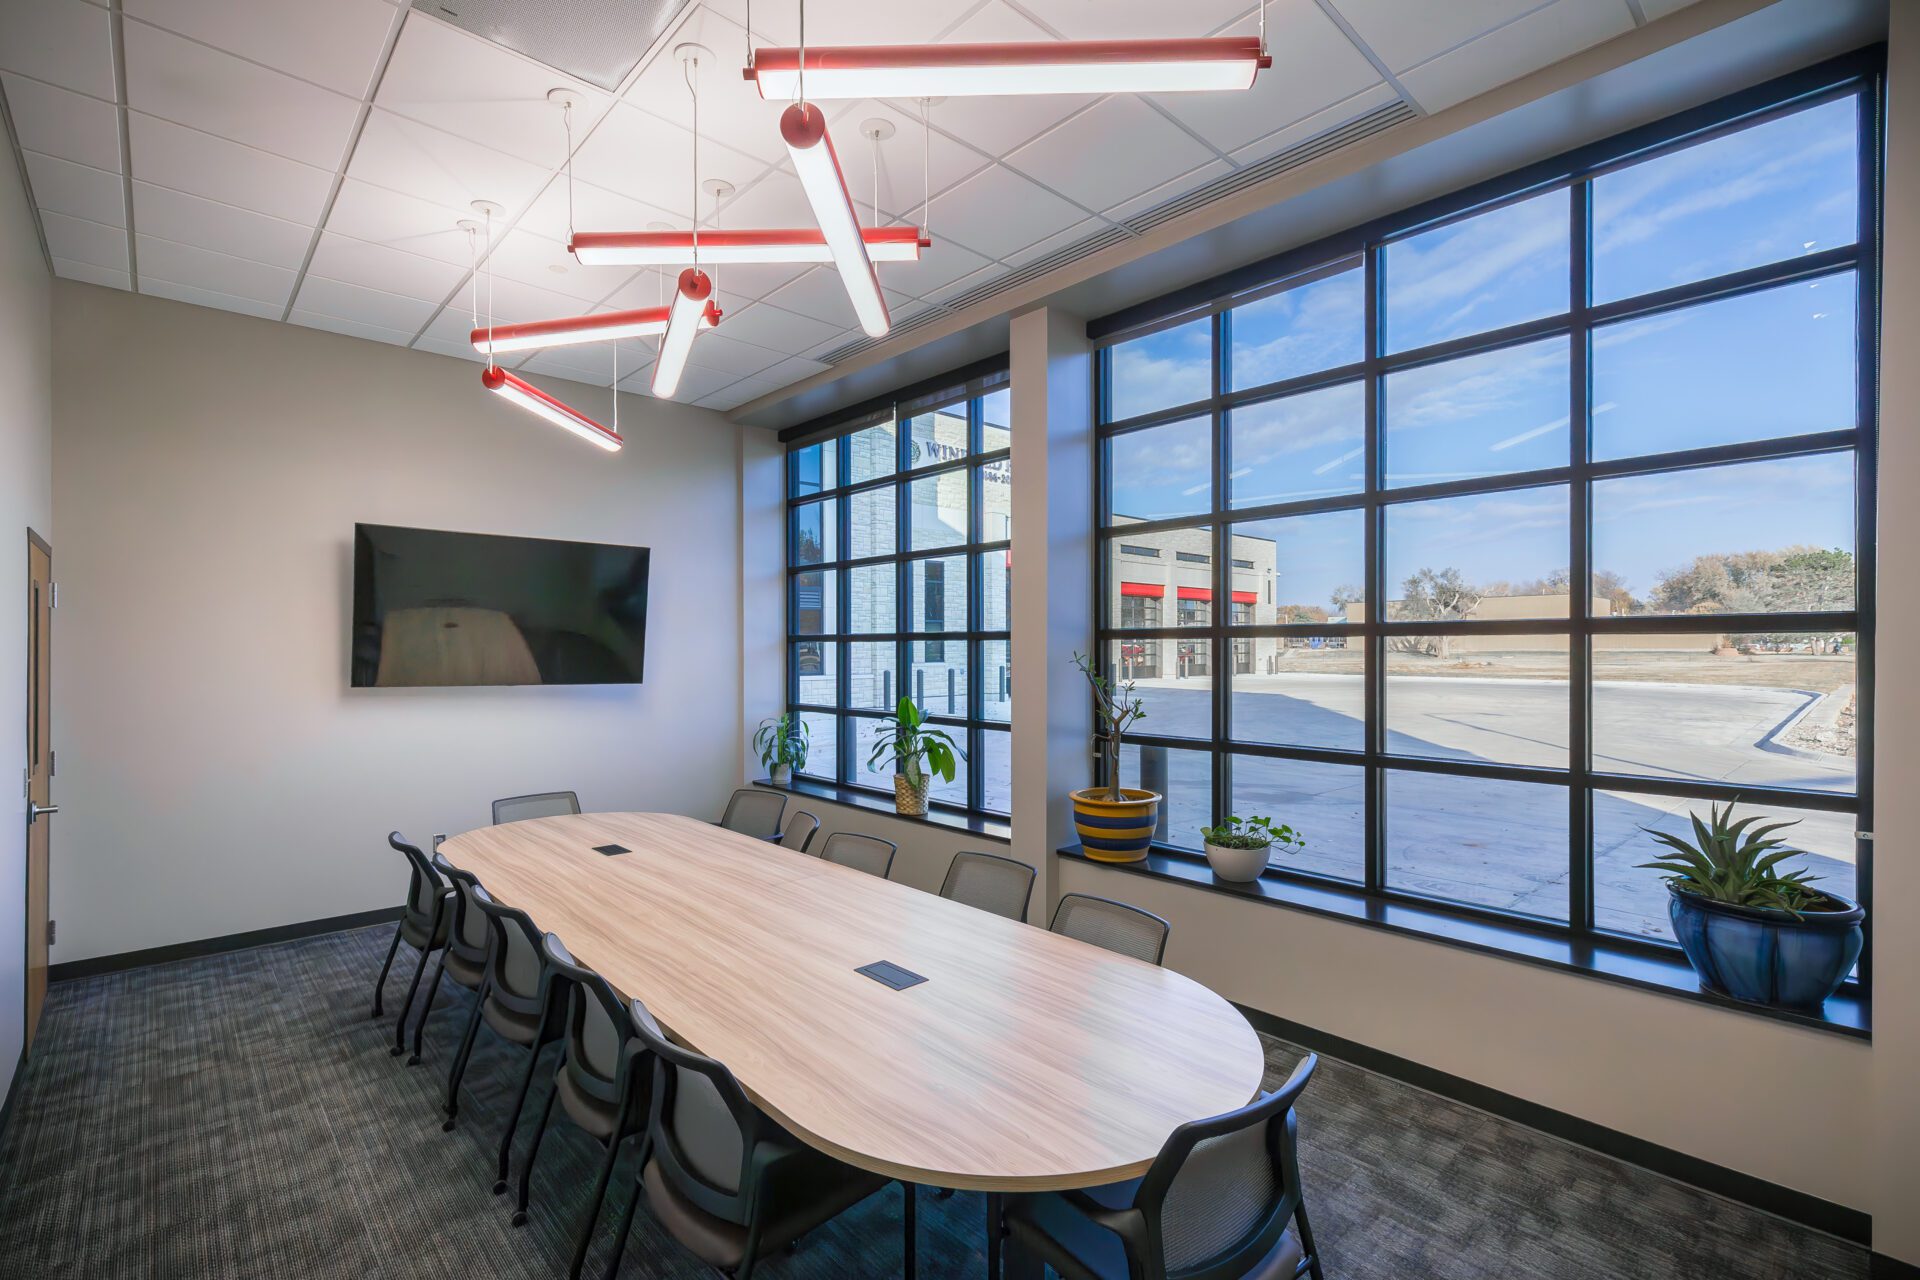 A bright and airy conference room with large windows along one wall, and cylindrical ceiling lights.